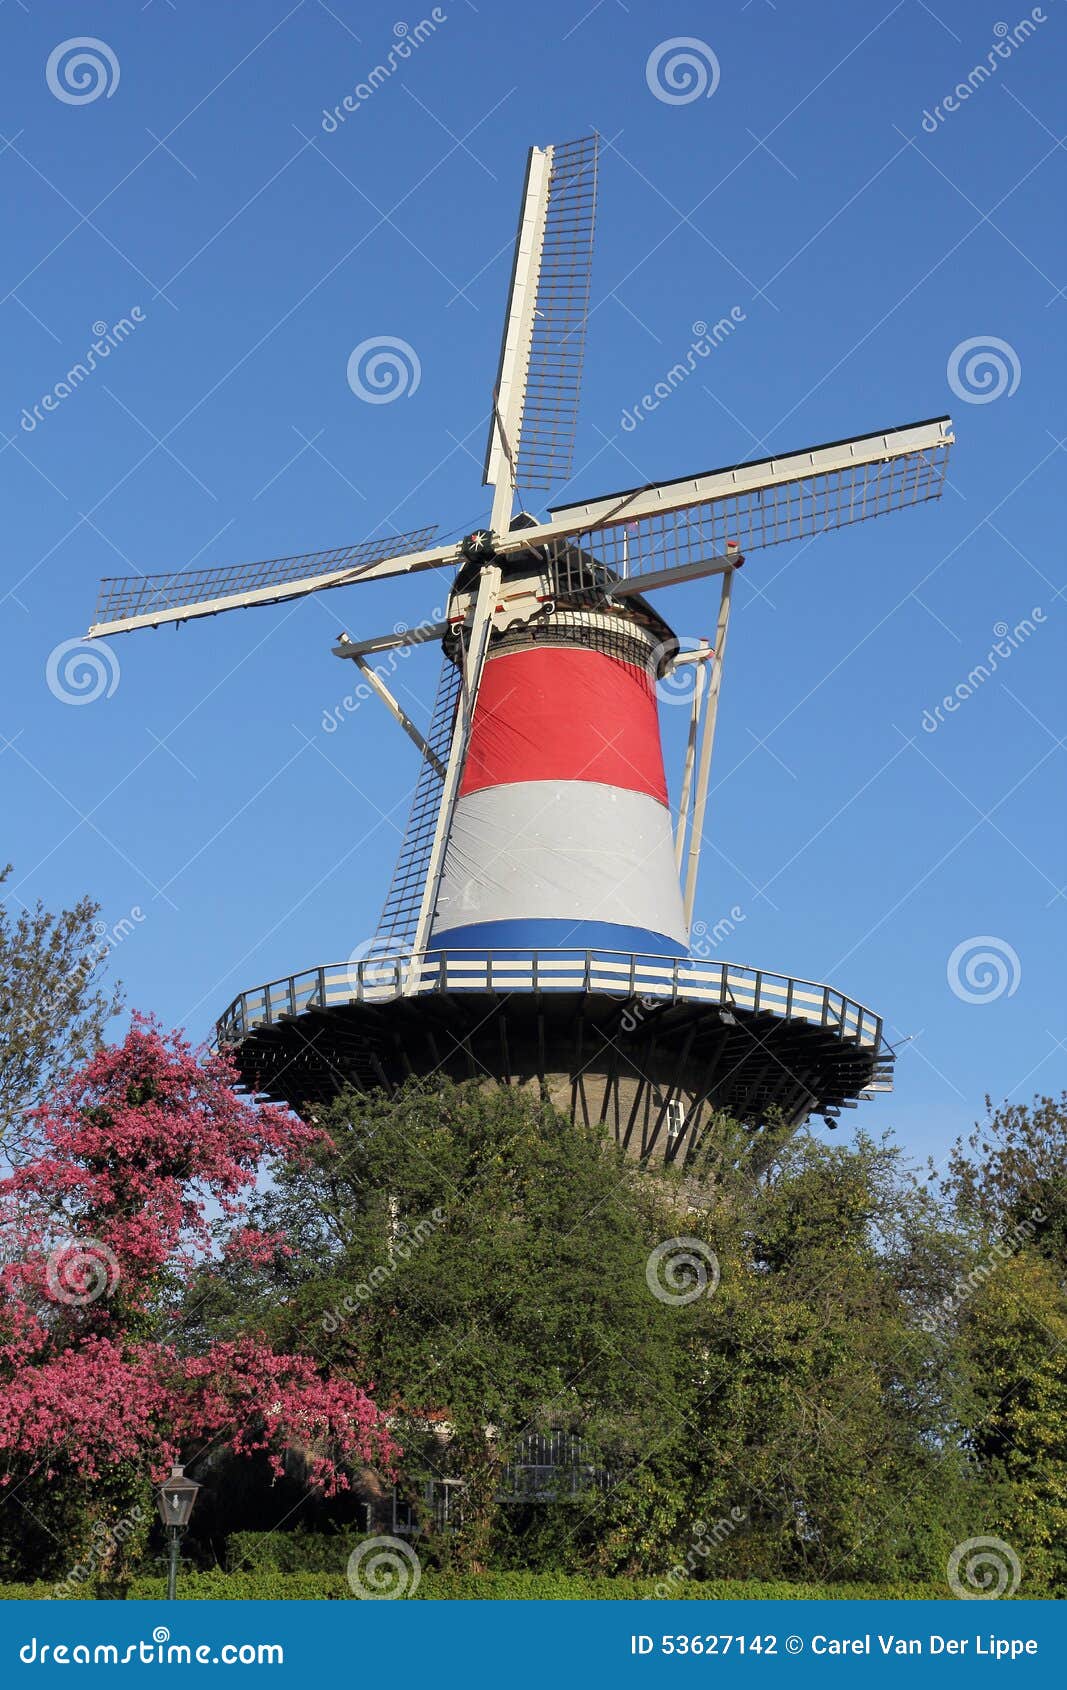 dutch tower mill in leiden, dressed in red, white and blue